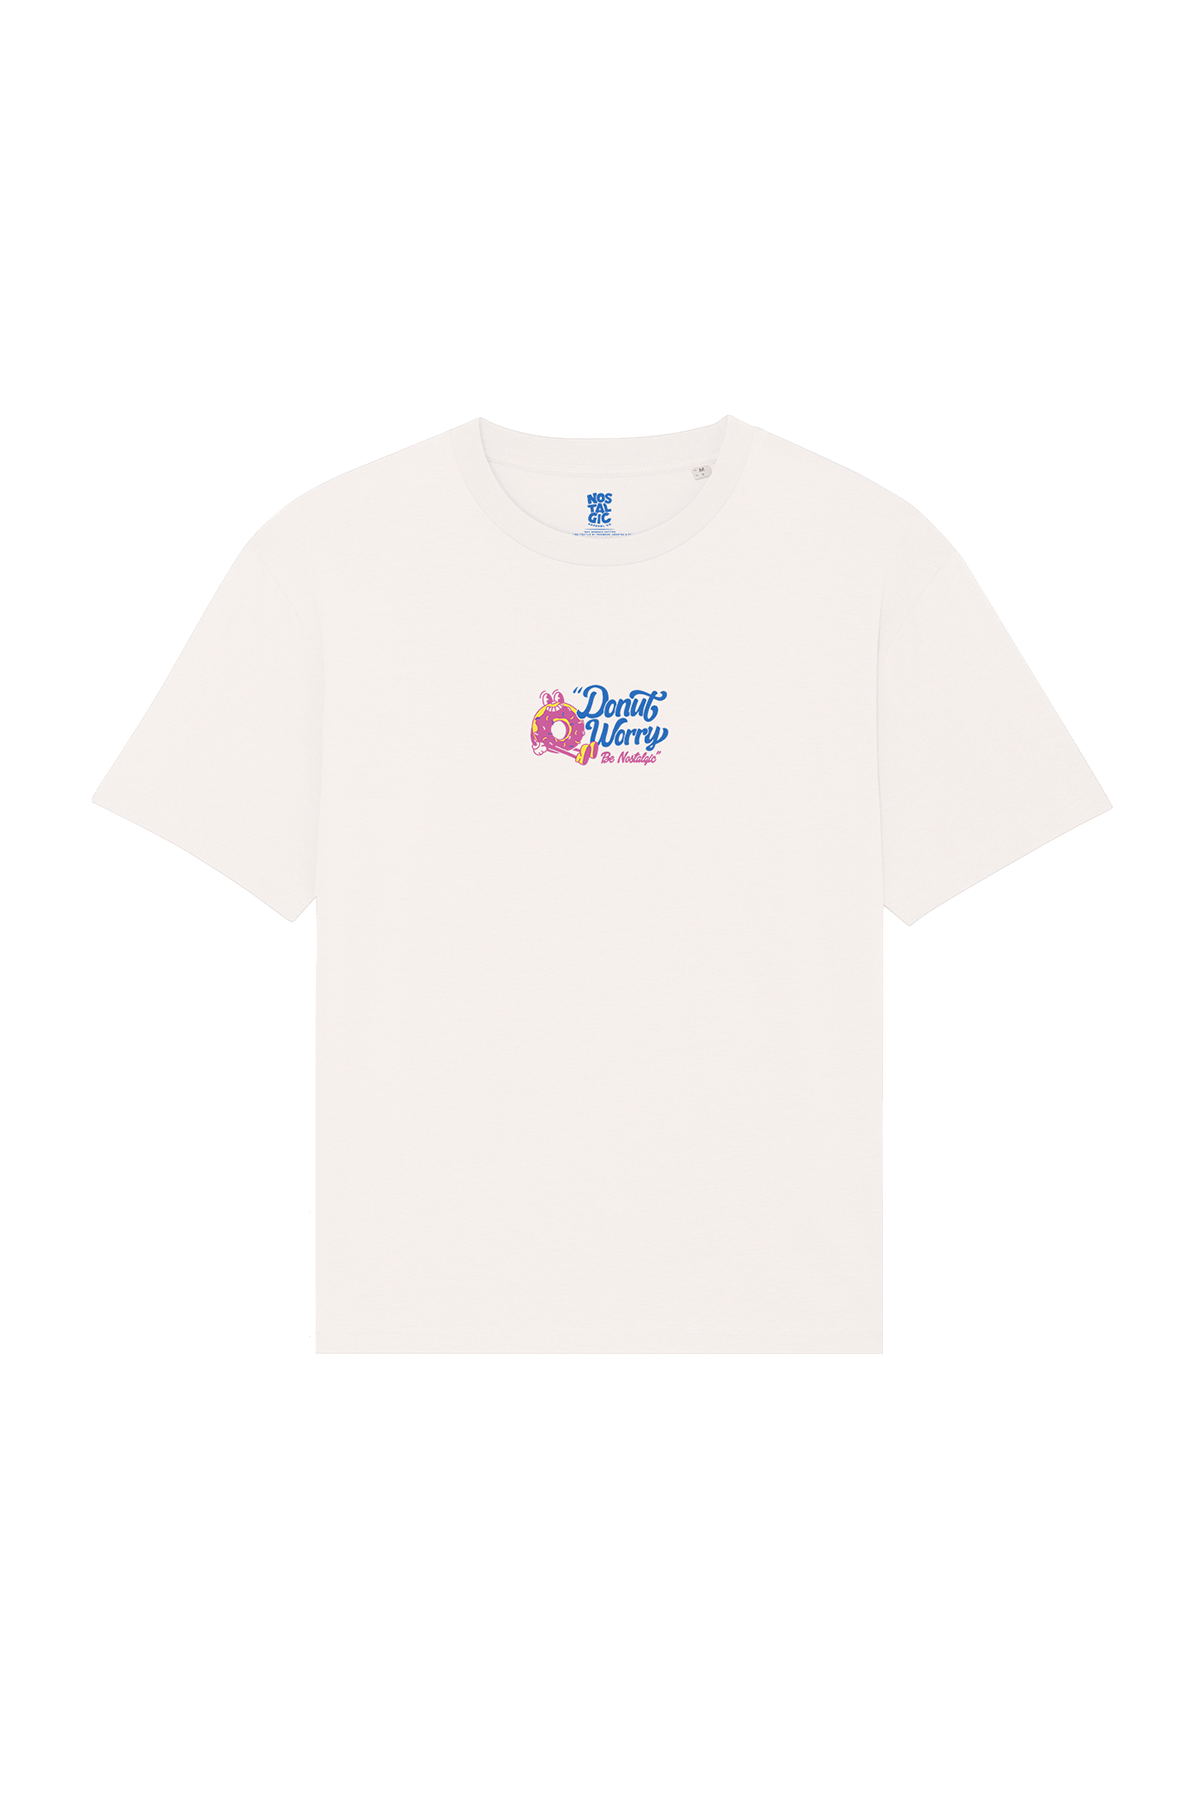 Donut Worry | OffWhite Tee